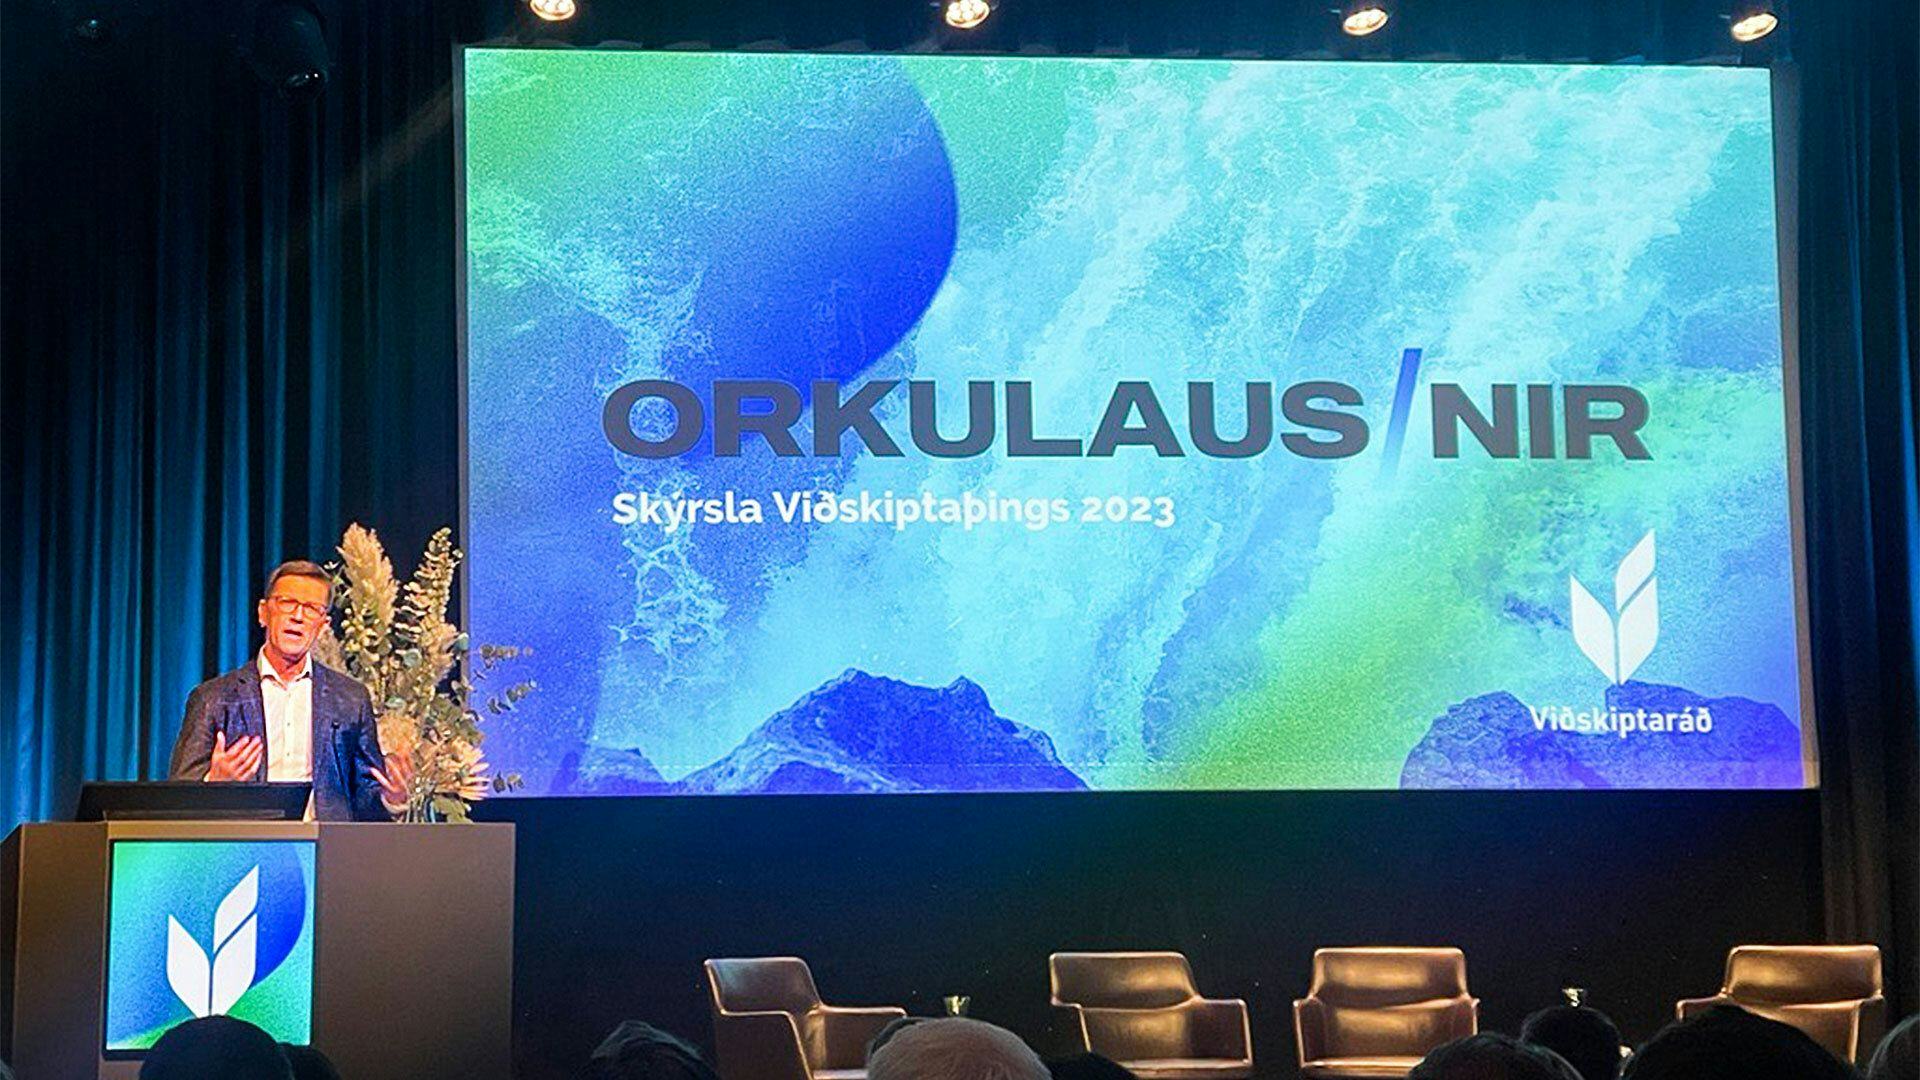 A man is speaking at a lectern with a presentation screen in the background displaying the words "ORKULAUS/N/A"